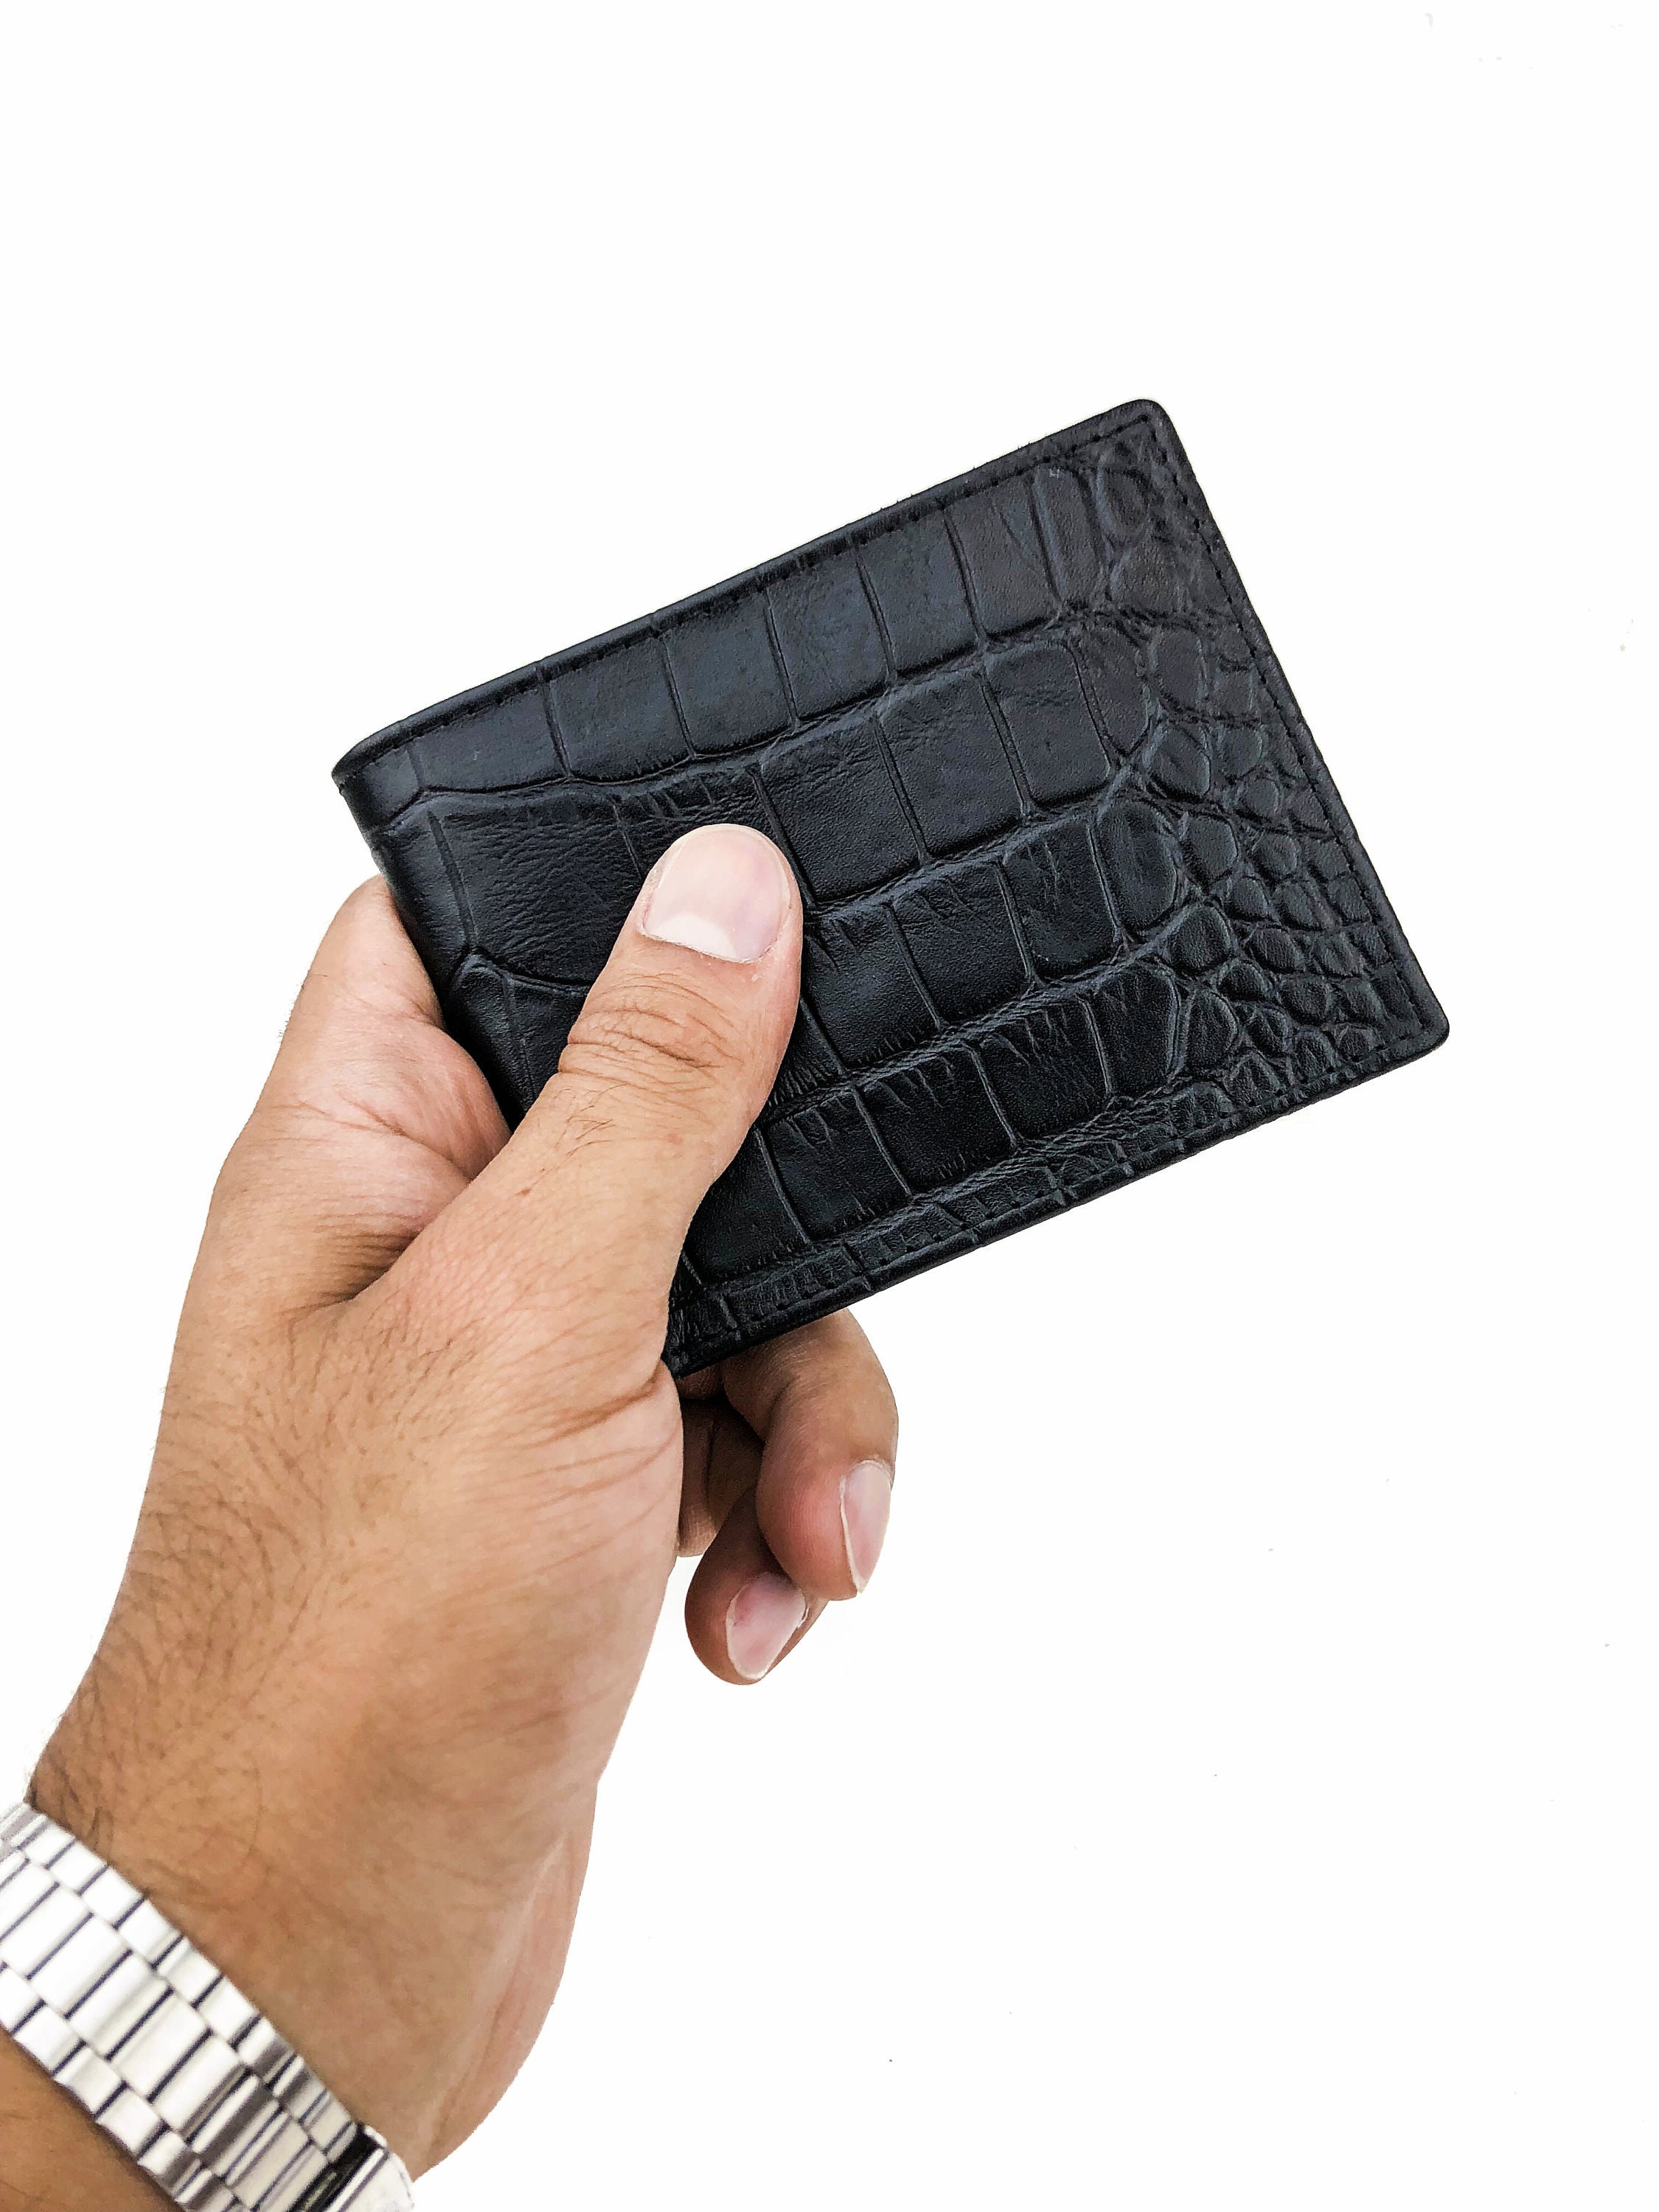 Genuine Leather Men's Wallets with Croco Print - Ecstatic Bags